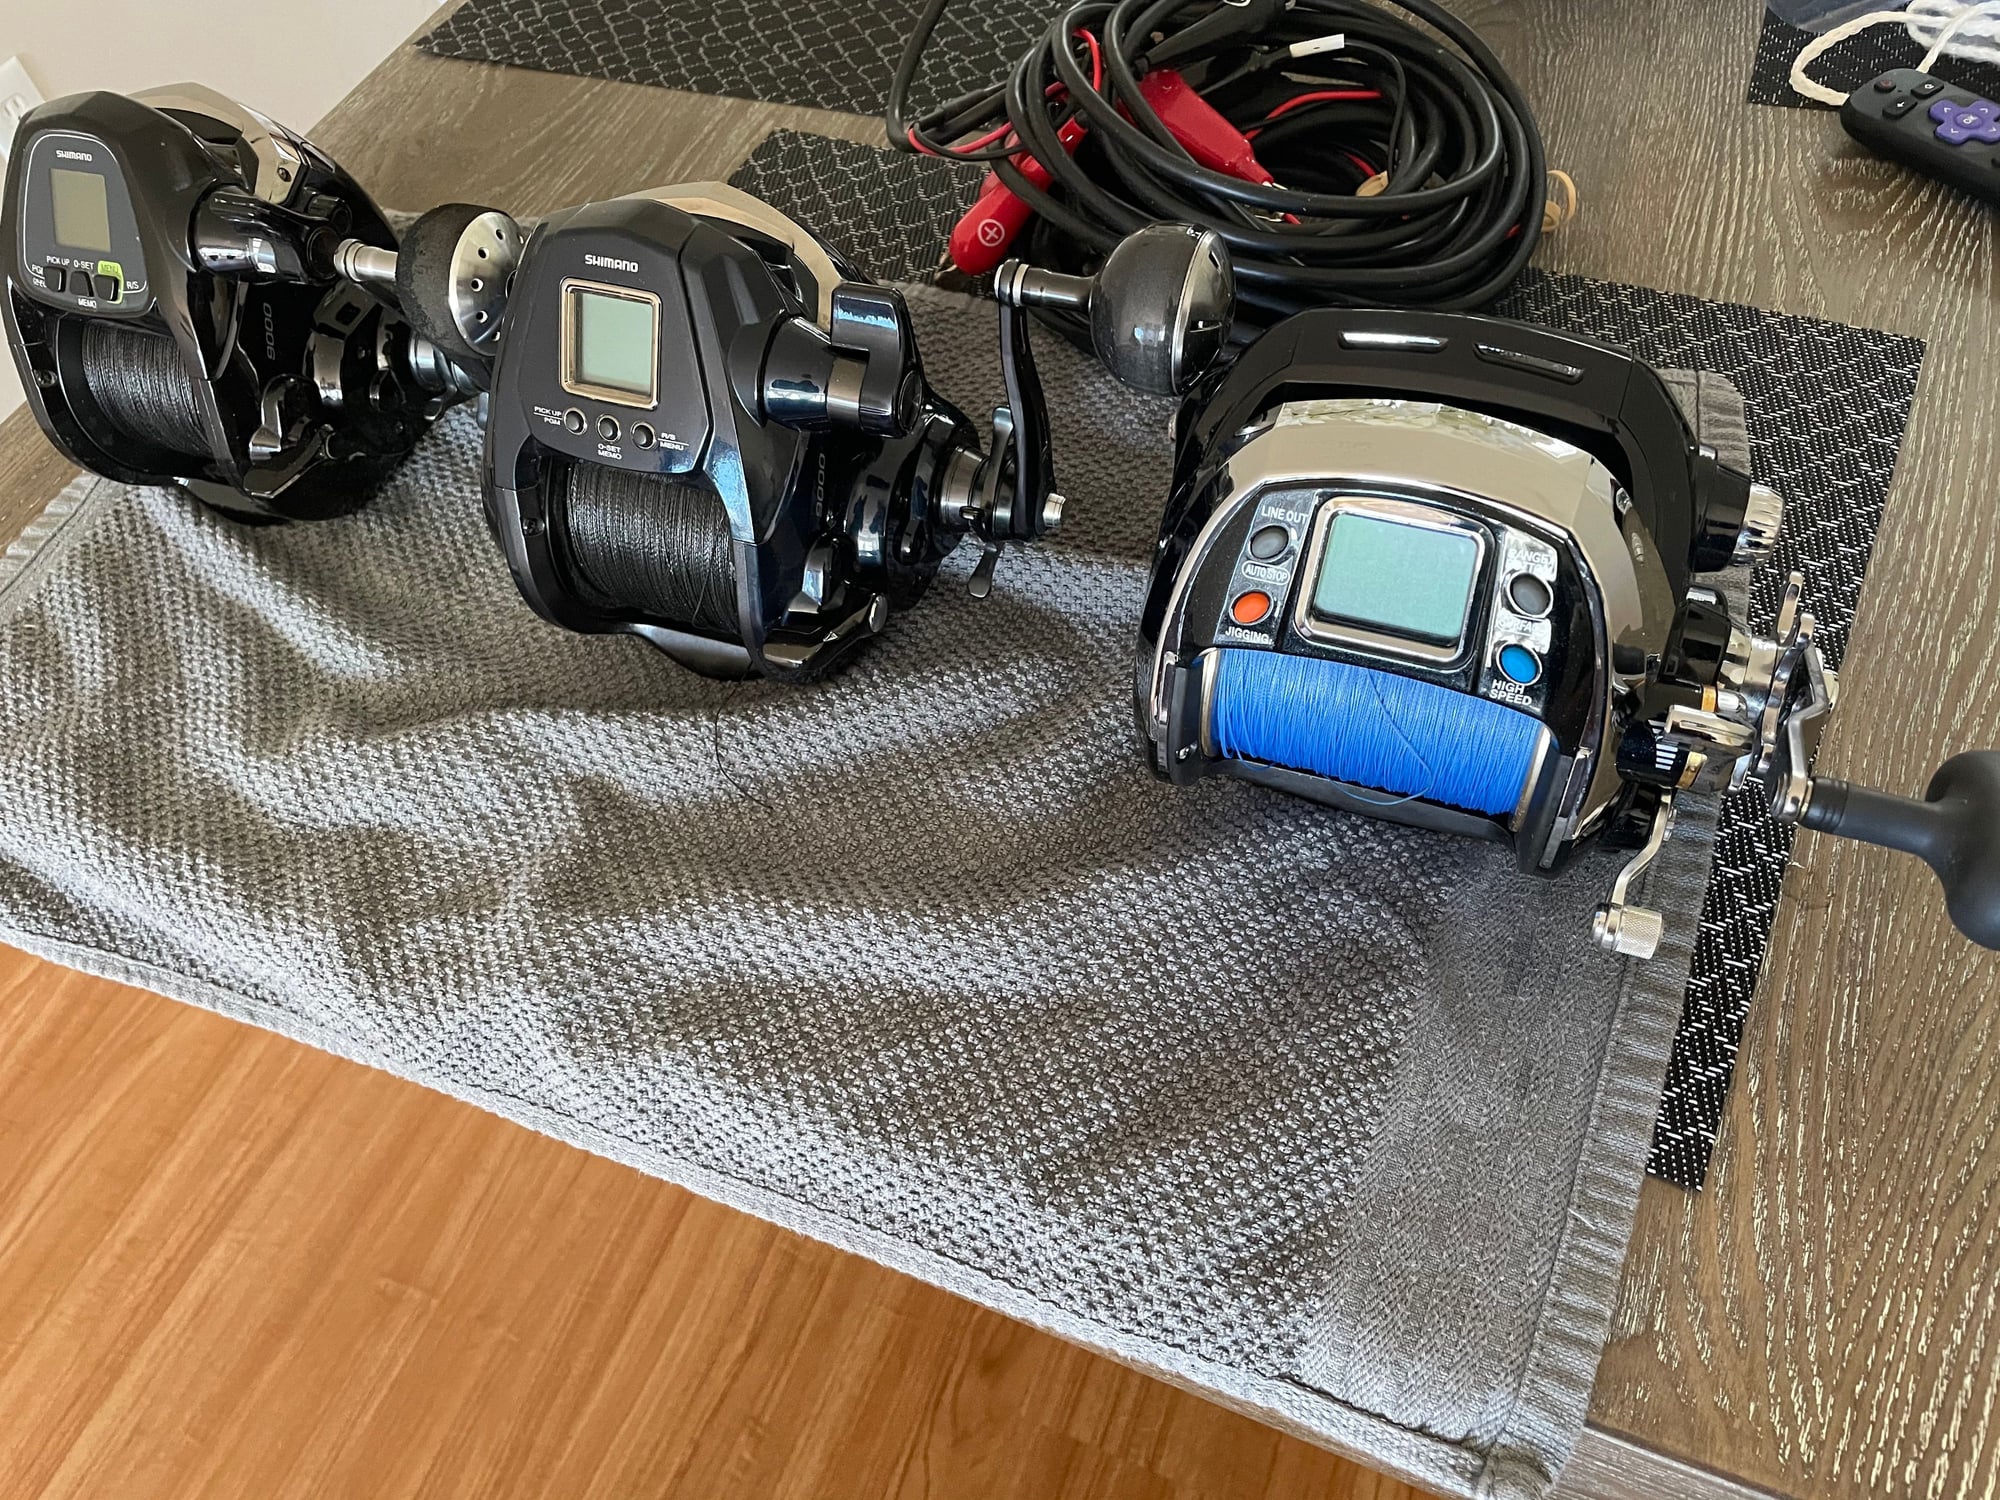 All sold 2 Shimano Forcemaster 9000, 1 Banax Kaigen 1000 electric reel -  The Hull Truth - Boating and Fishing Forum